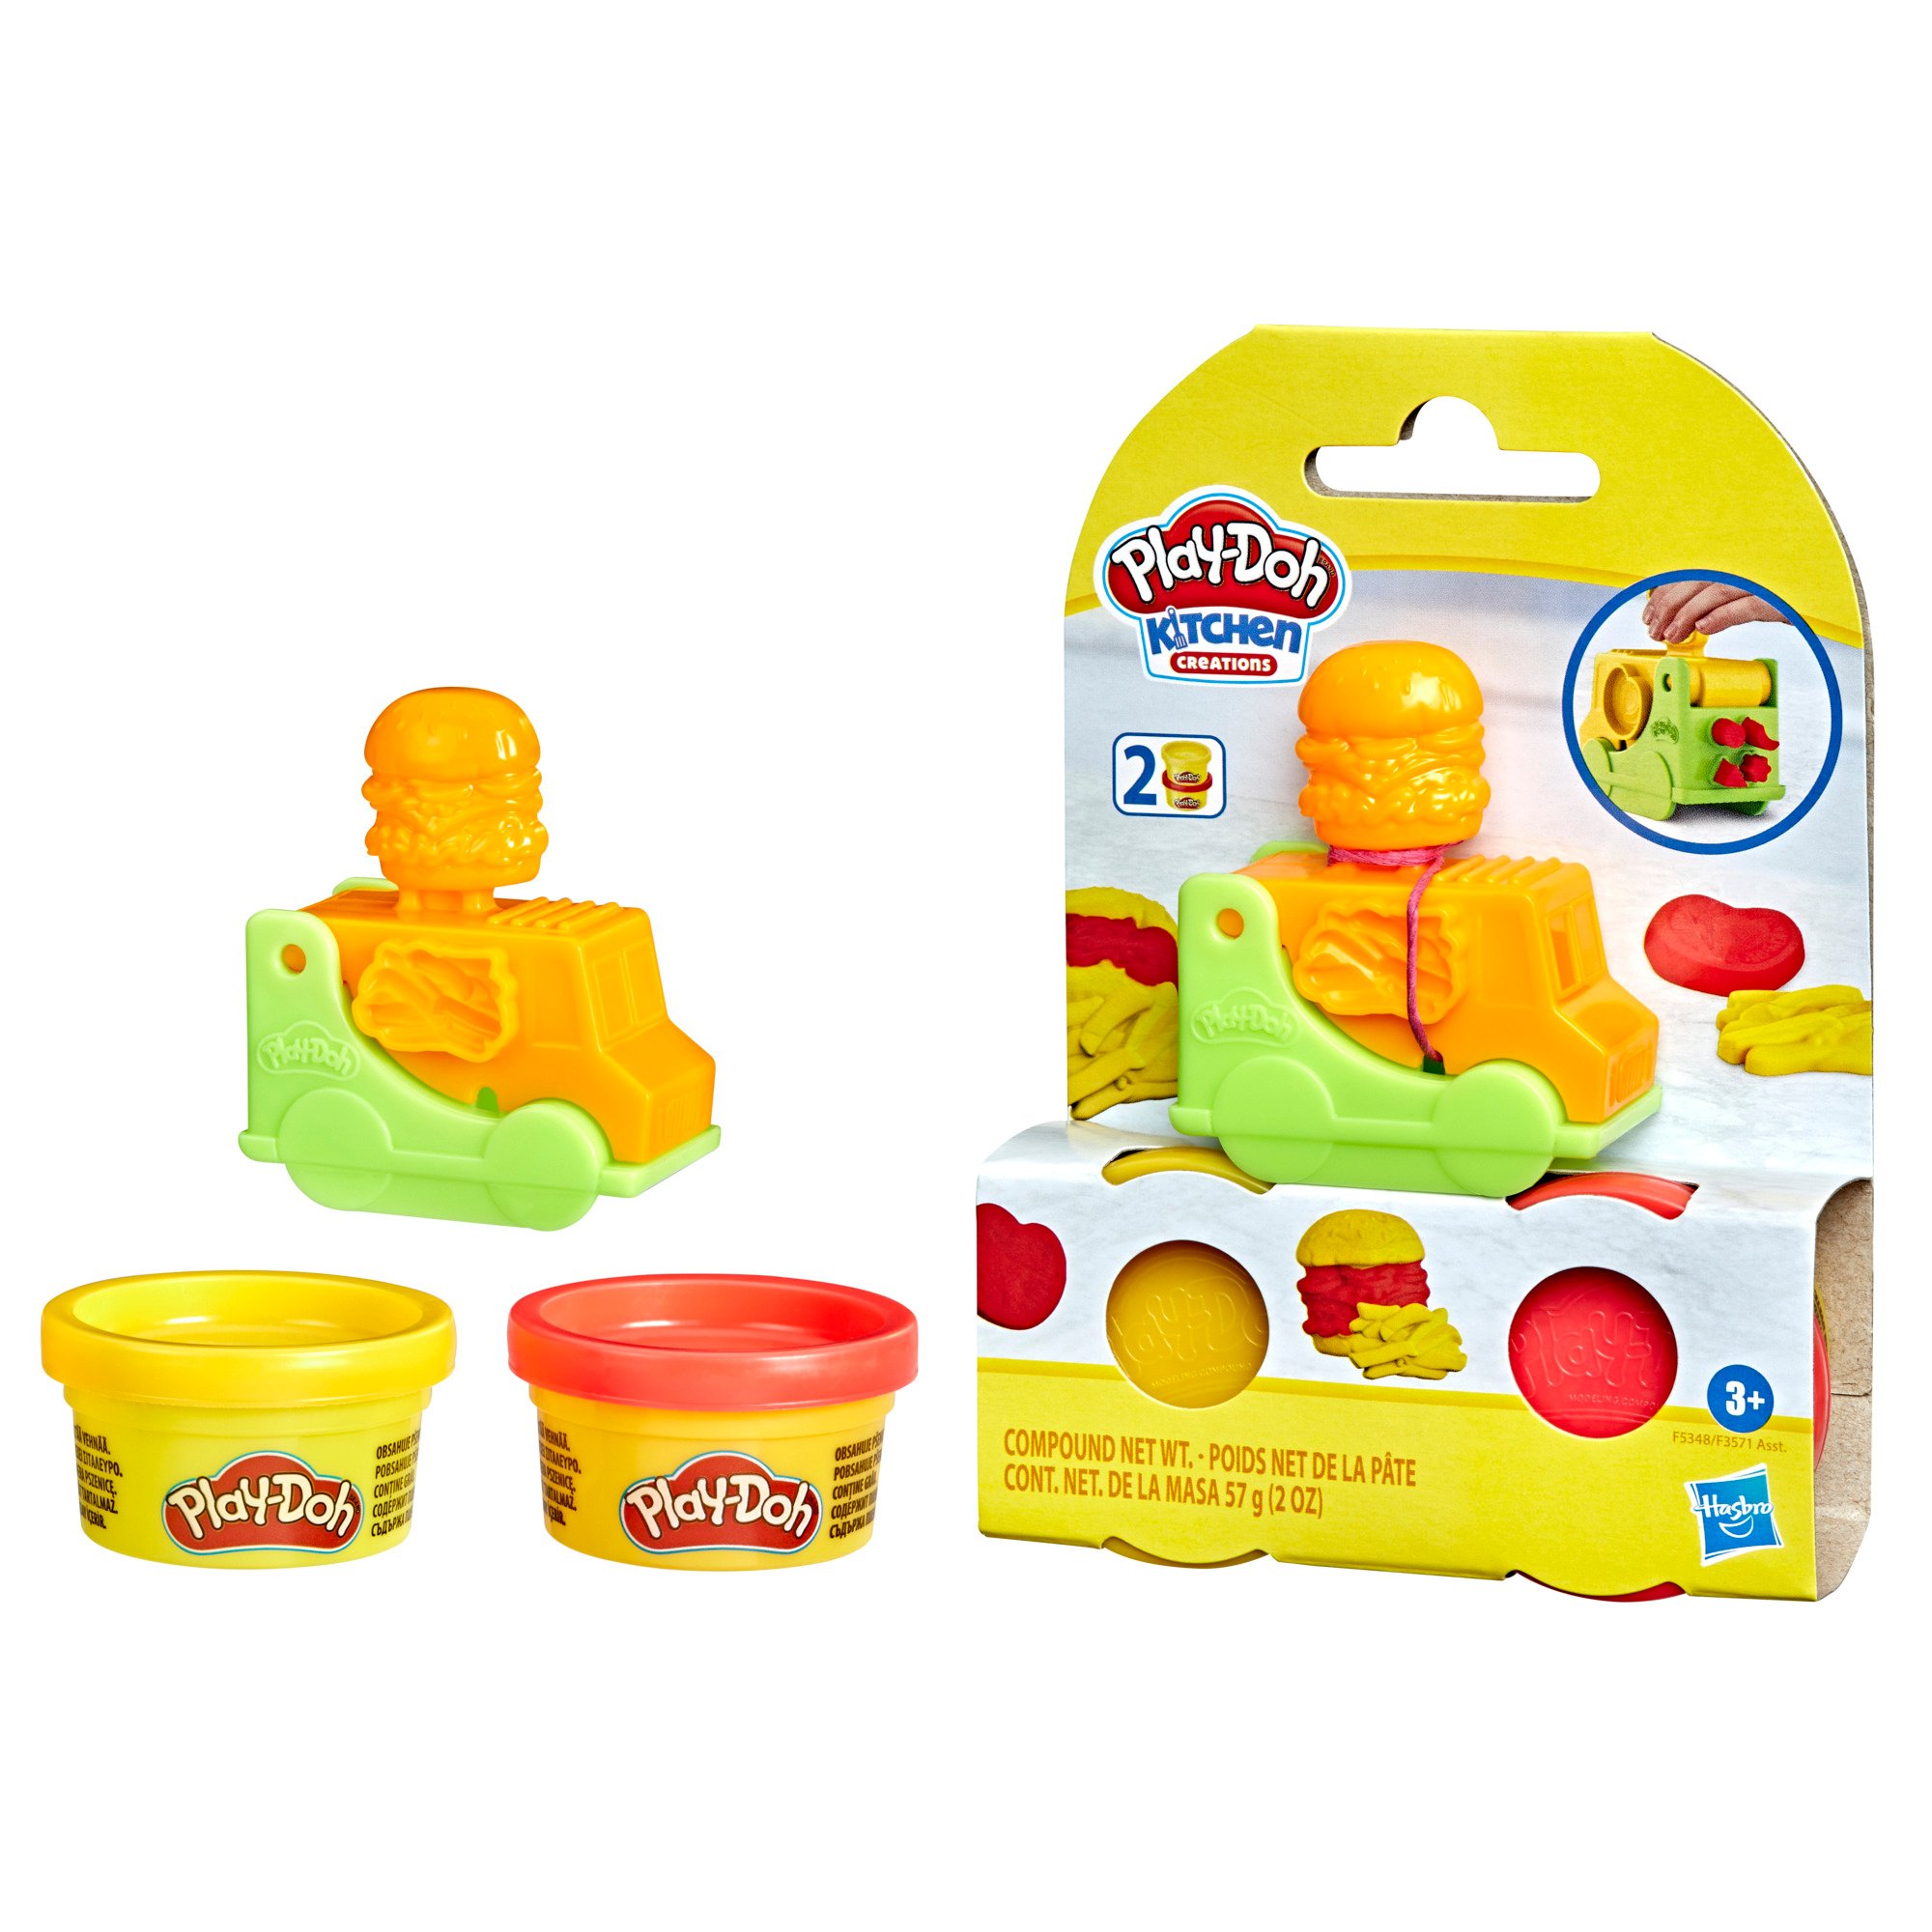 Play-Doh Kitchen Creations Pizza Oven Playset - Shop Playsets at H-E-B